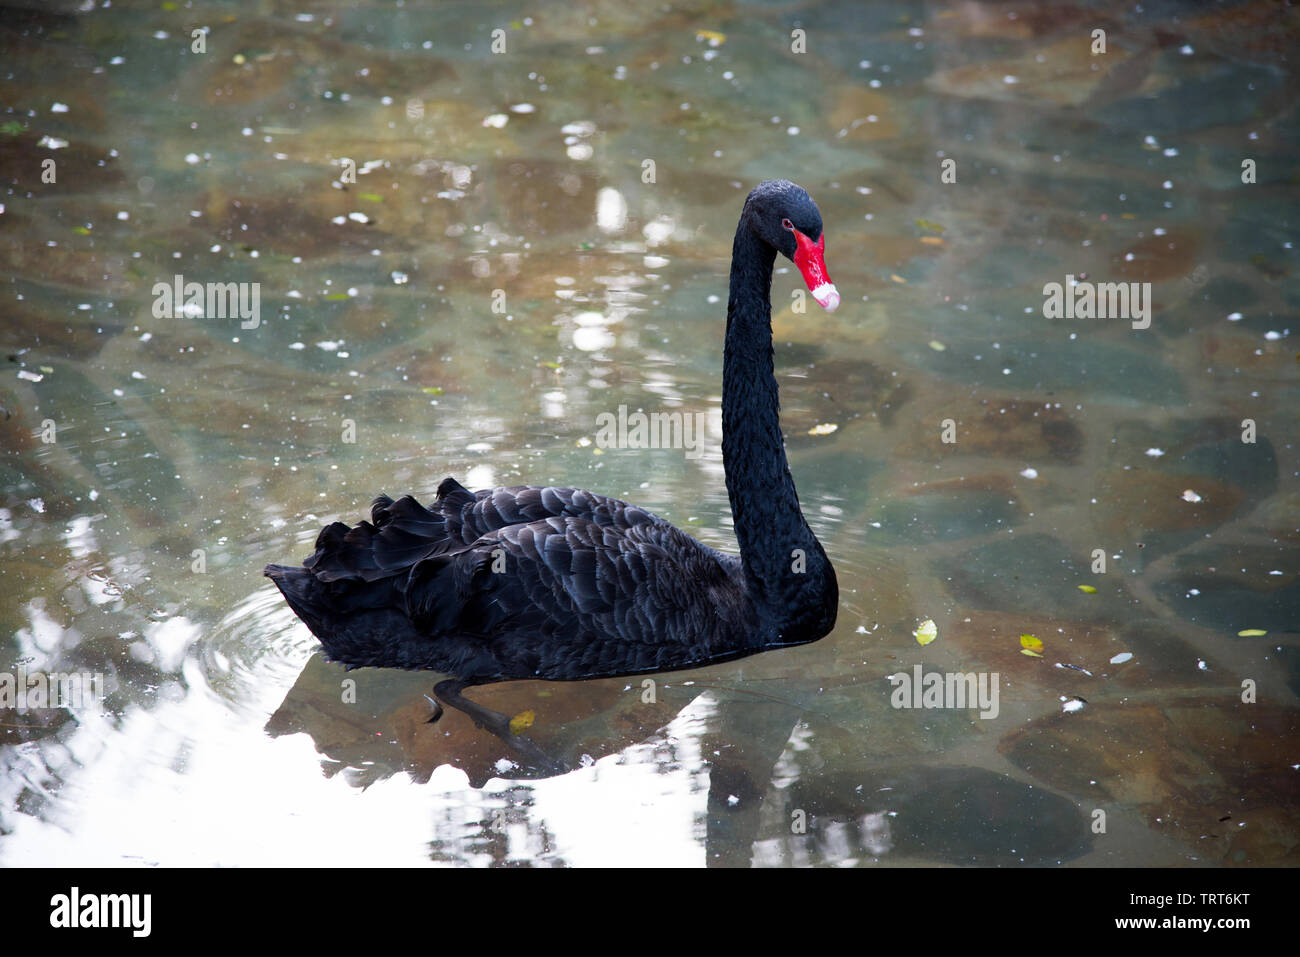 The Black swan ( Cygnus atratus)  with mostly black plumage and red bills with white ring. Waterbird. Stock Photo